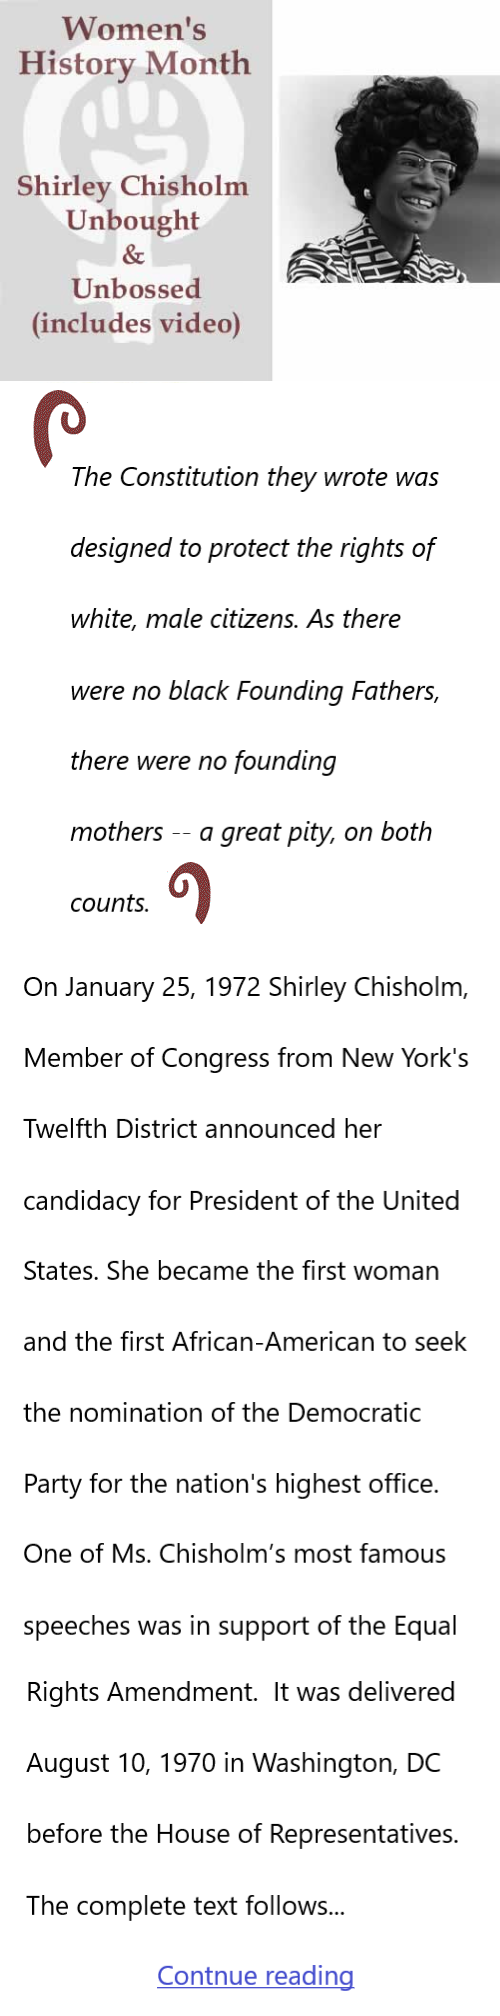 BlackCommentator.com Mar 16, 2023 - Issue 947: Women's History Month - Shirley Chisholm - Unbought and Unbossed